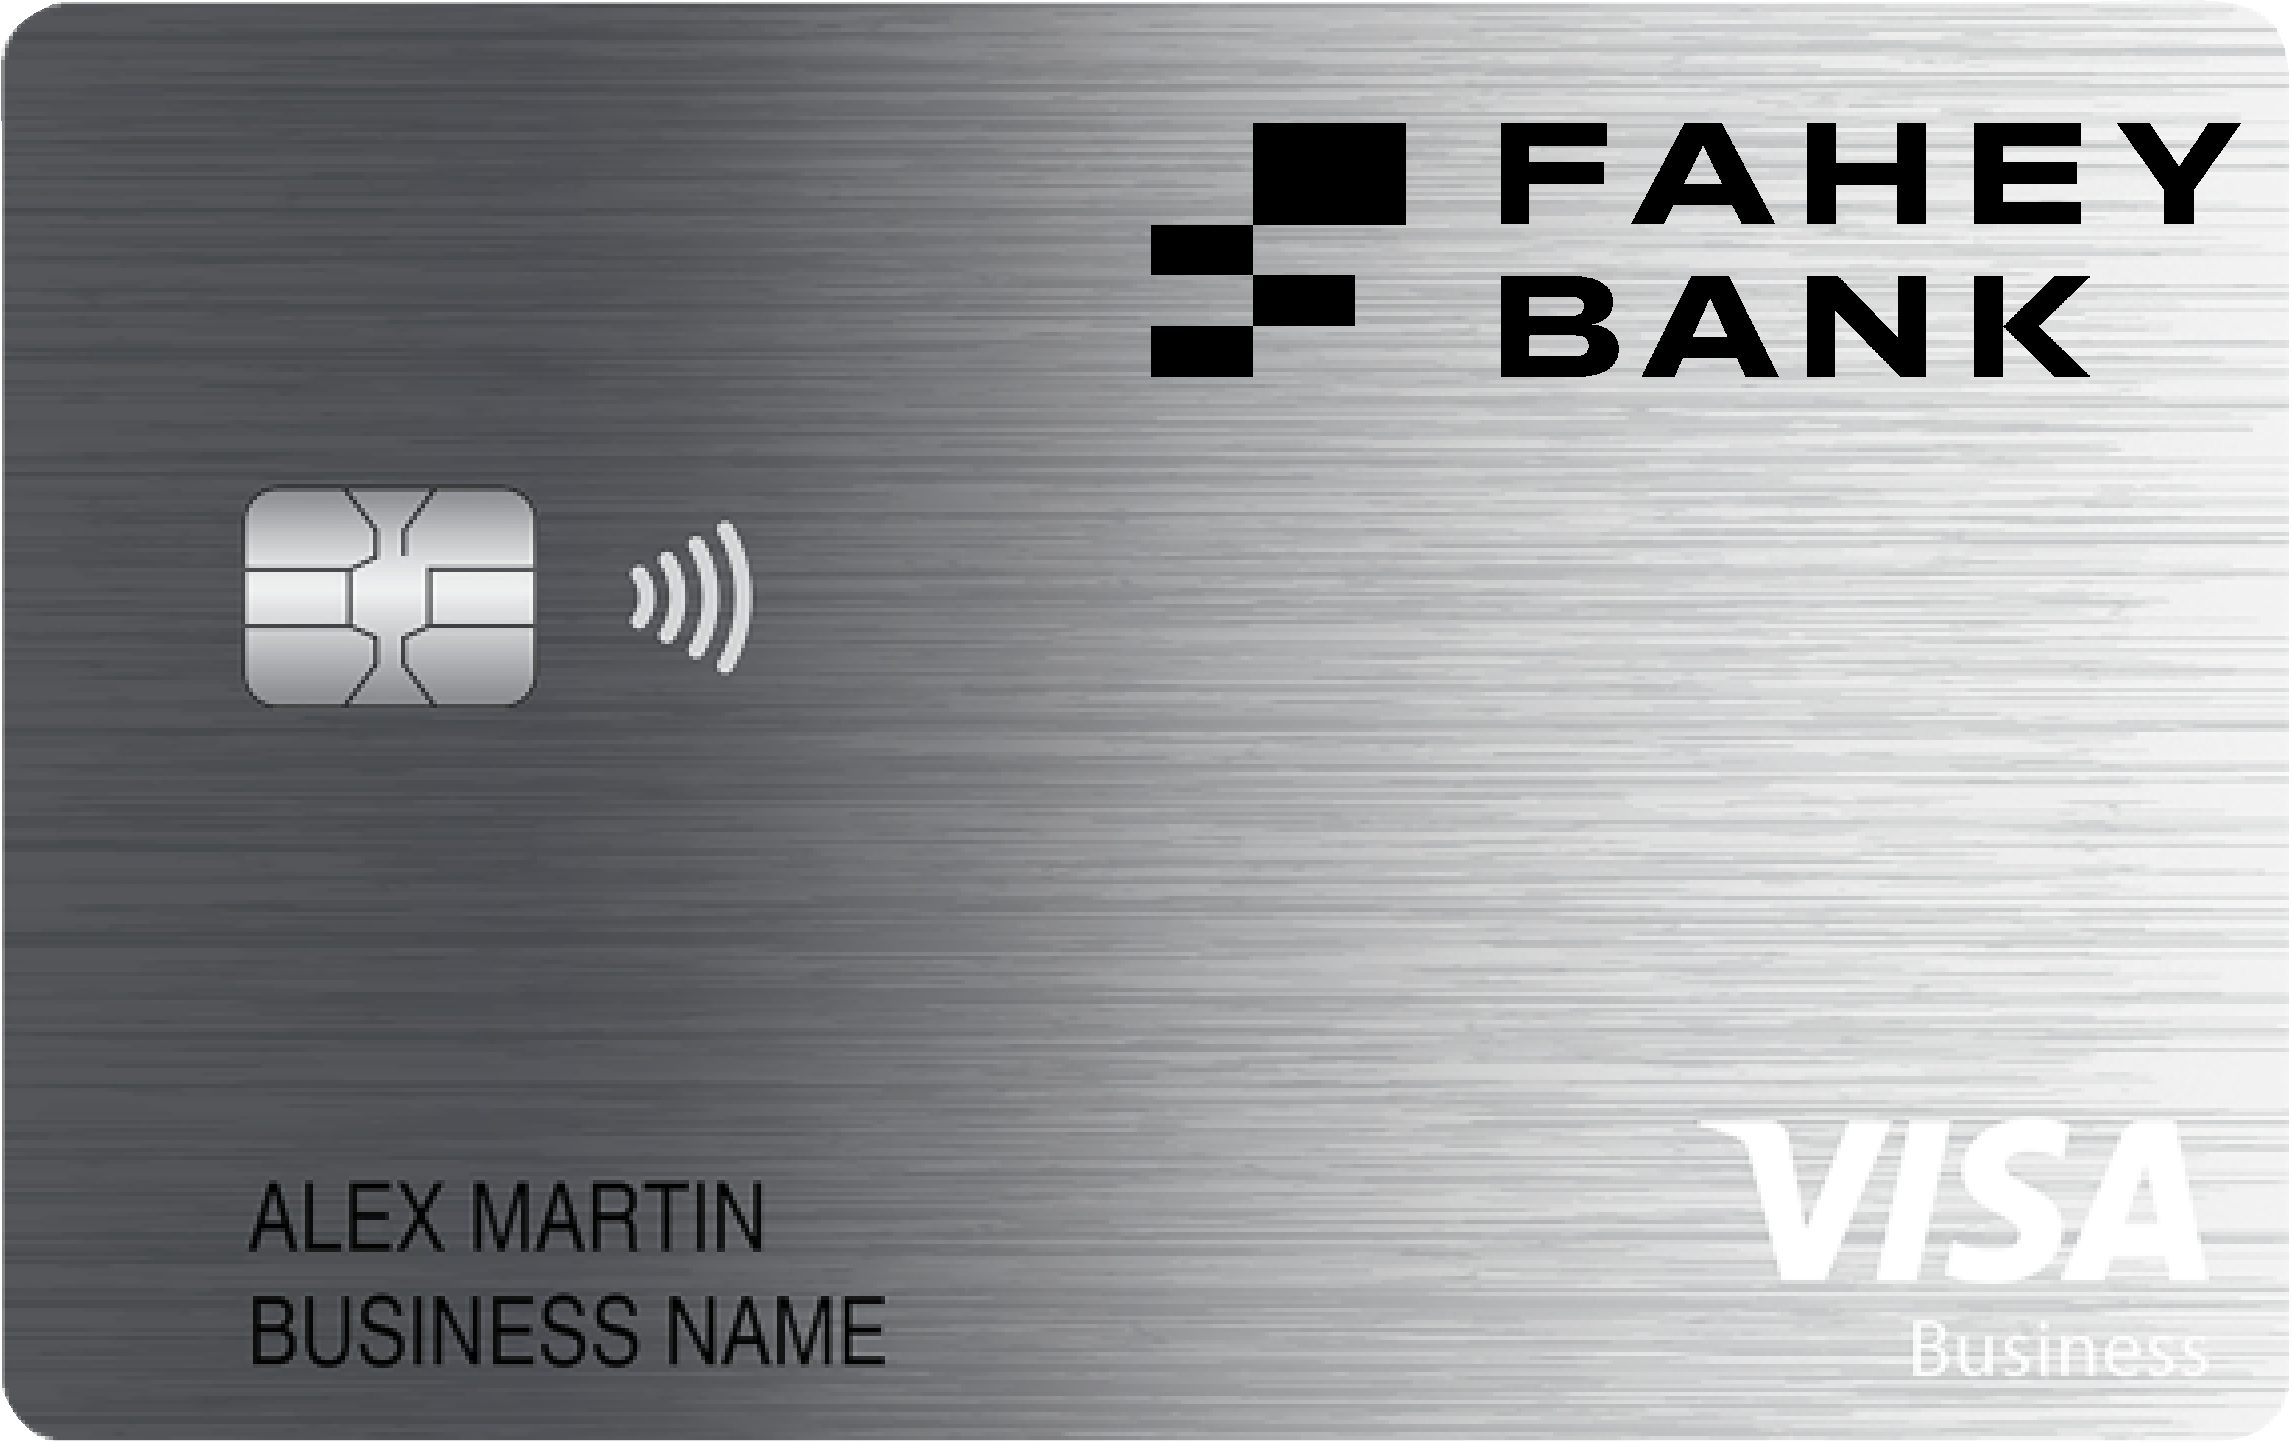 The Fahey Banking Company Business Cash Preferred Card